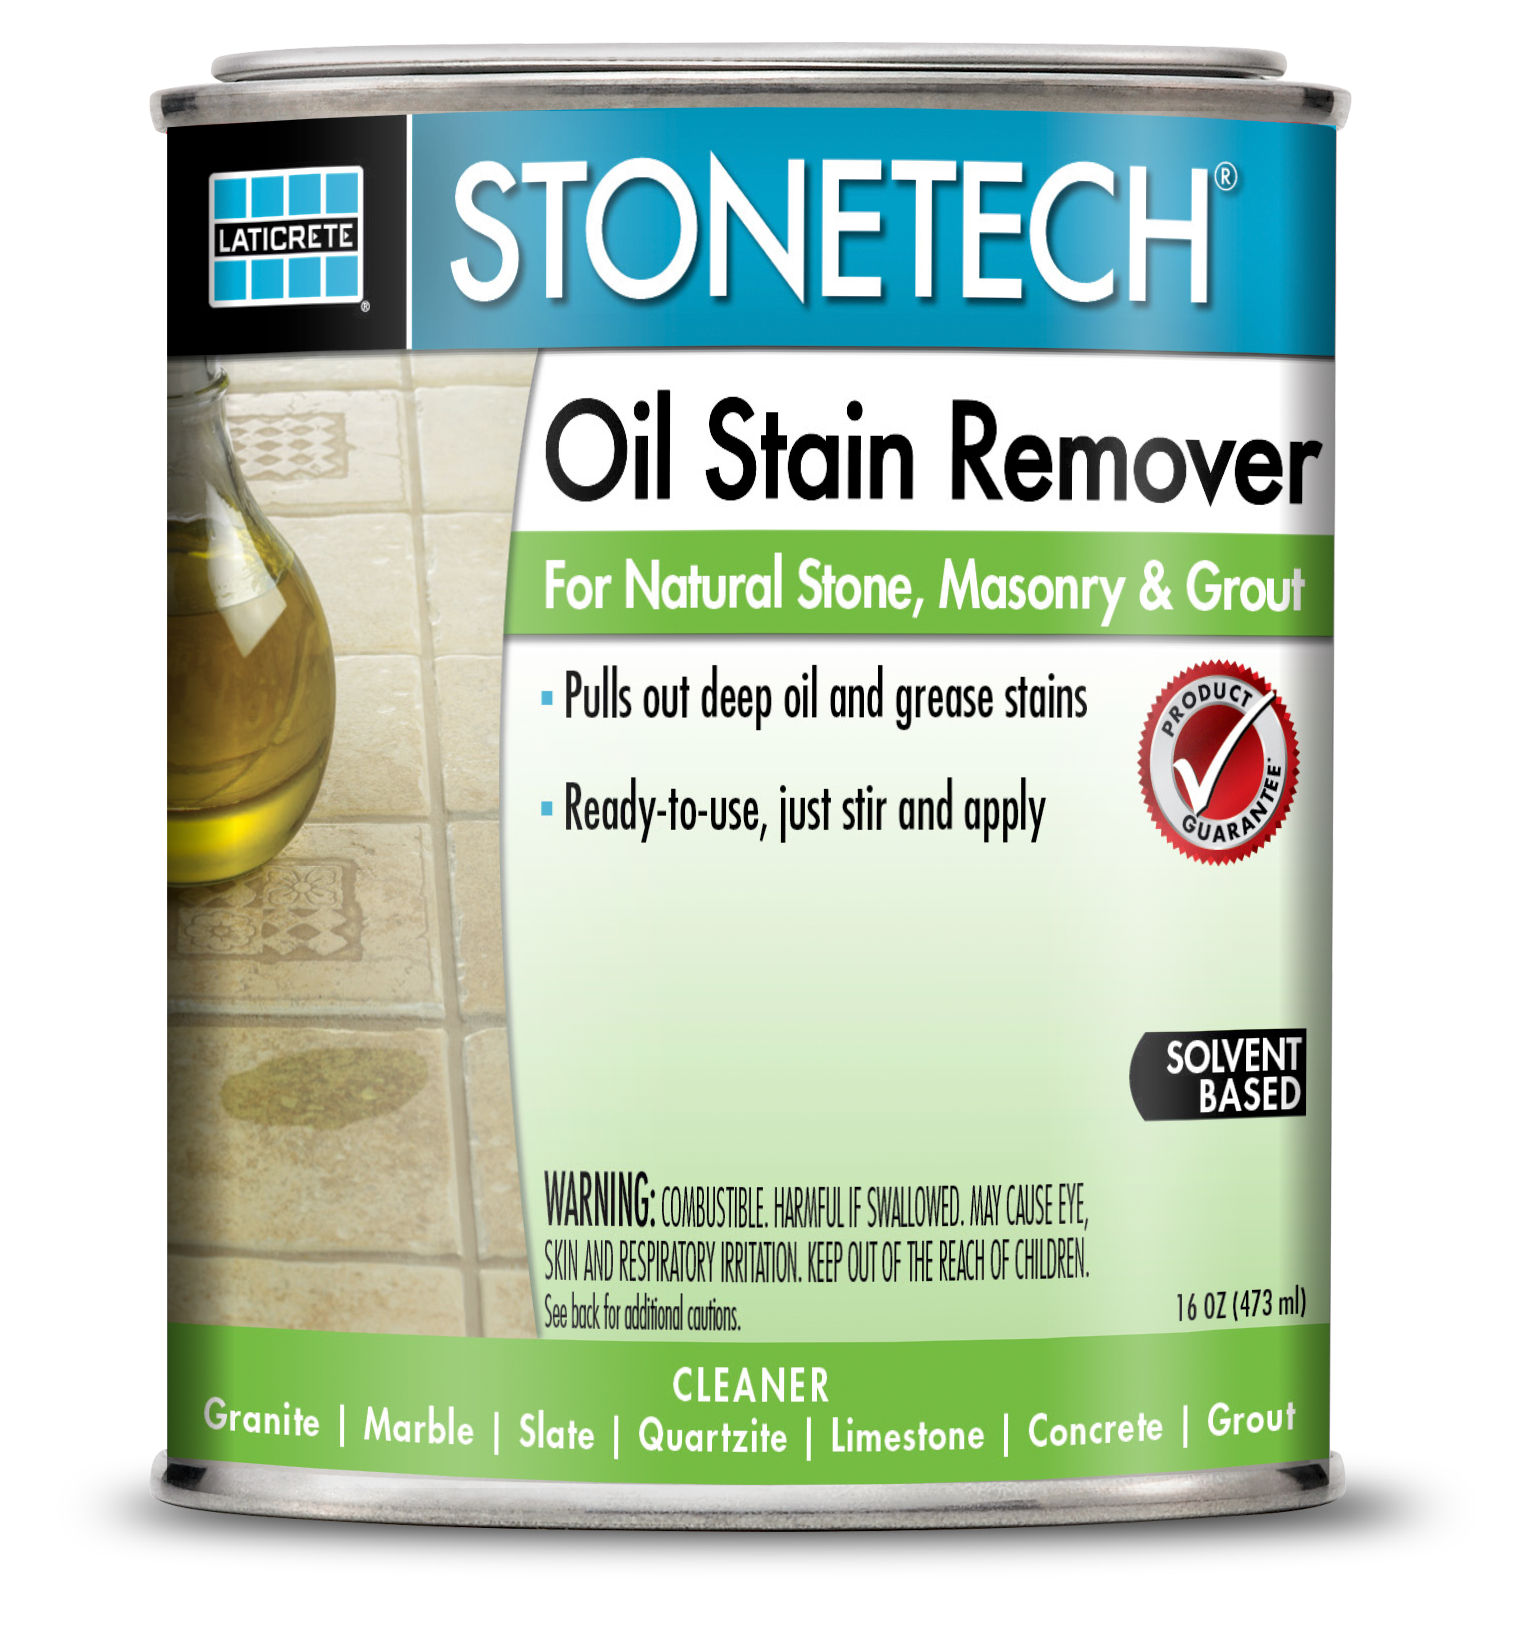 STONETECH® Oil Stain Remover